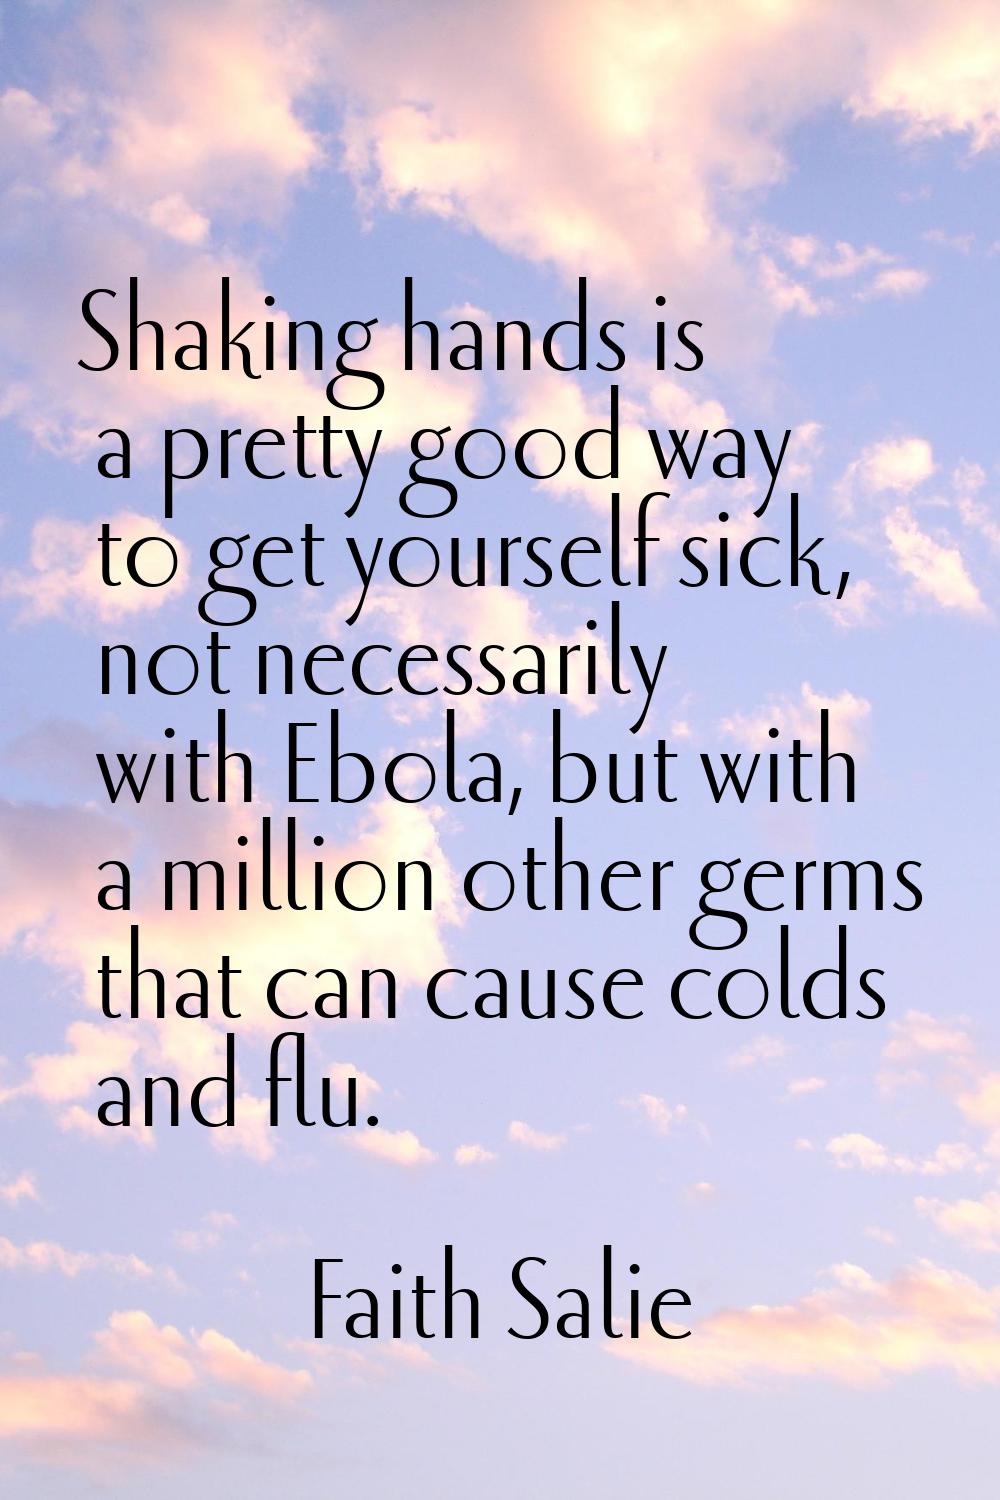 Shaking hands is a pretty good way to get yourself sick, not necessarily with Ebola, but with a mil